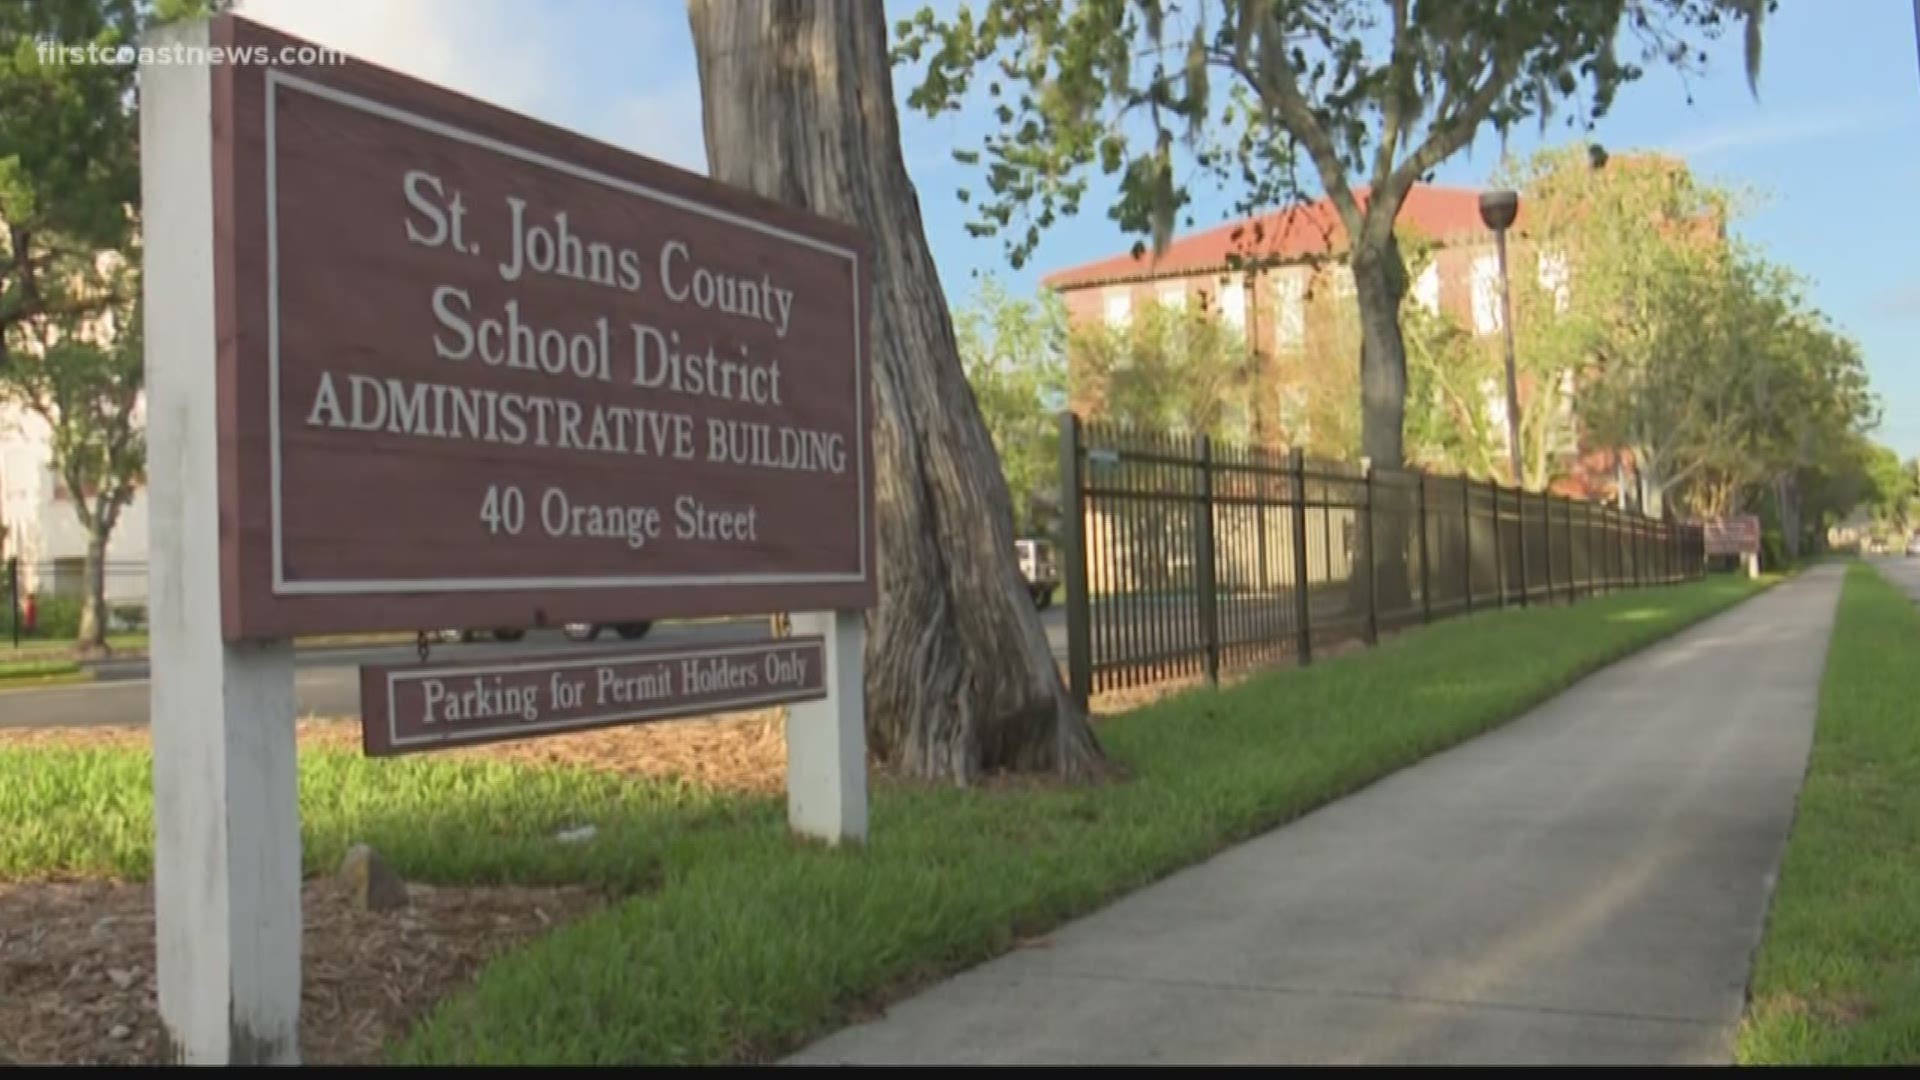 While St. Johns County boasts the top-ranked schools in the state, some are showing reasons to be concerned.